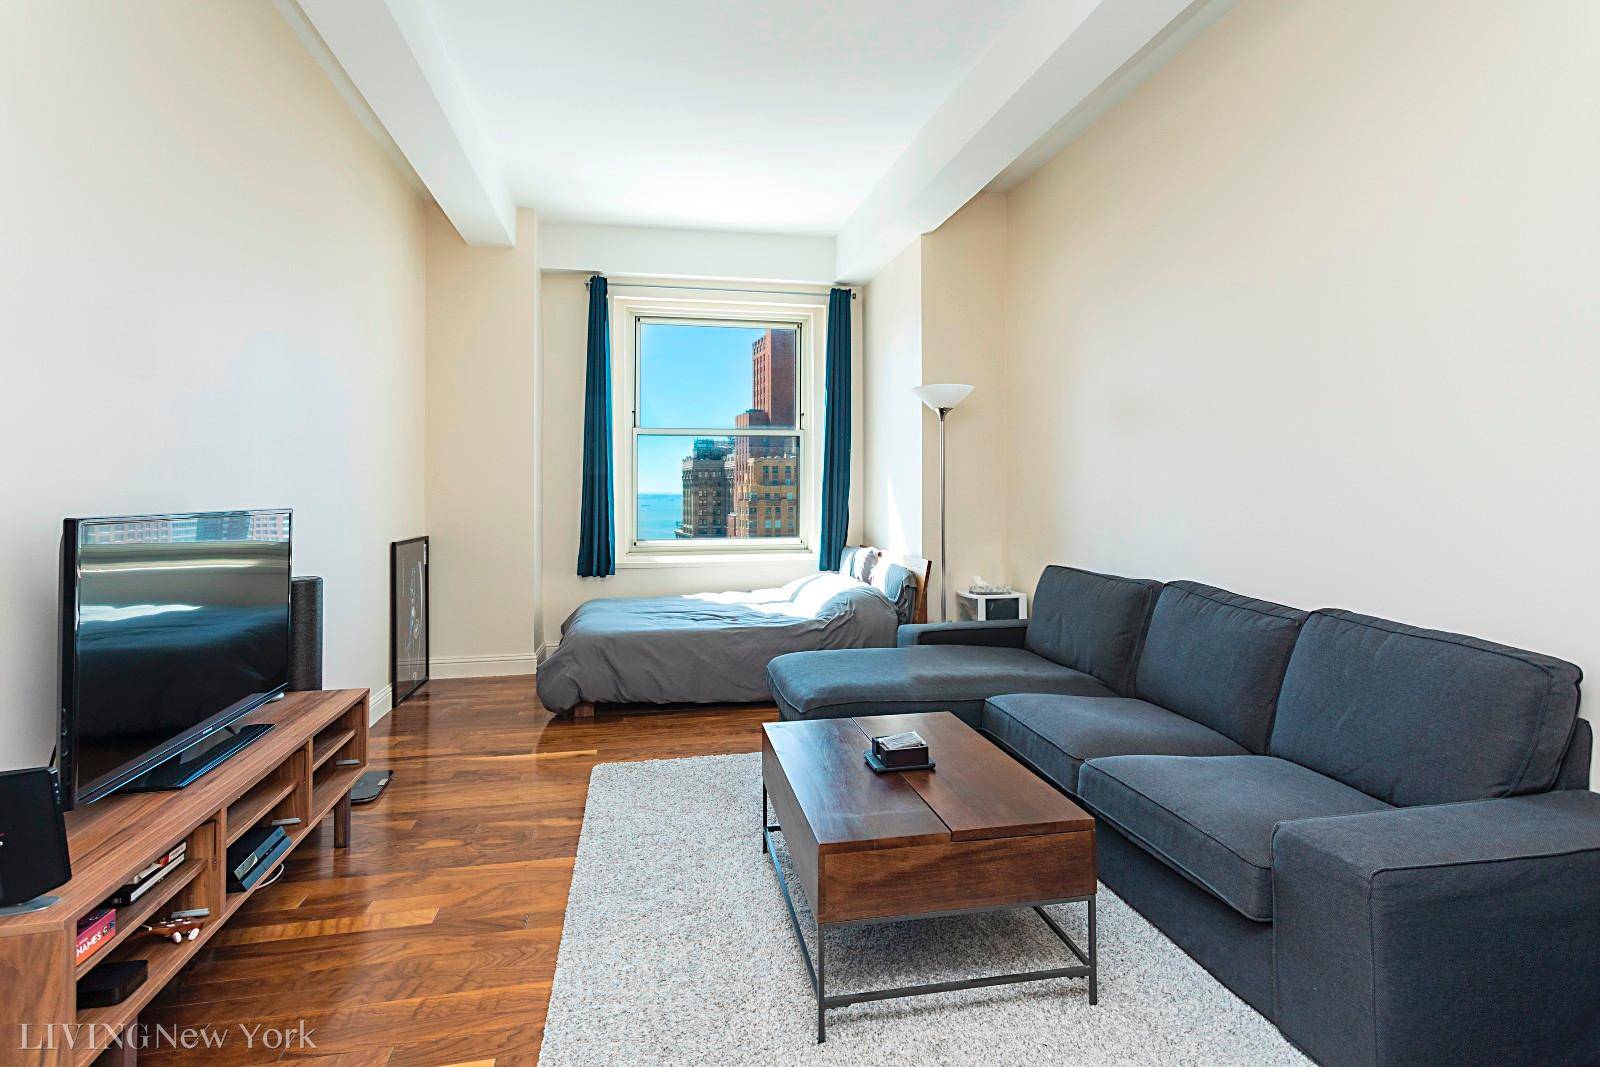 This beautiful, airy studio is located in downtown Manhattan at the Greenwich Club Residence.